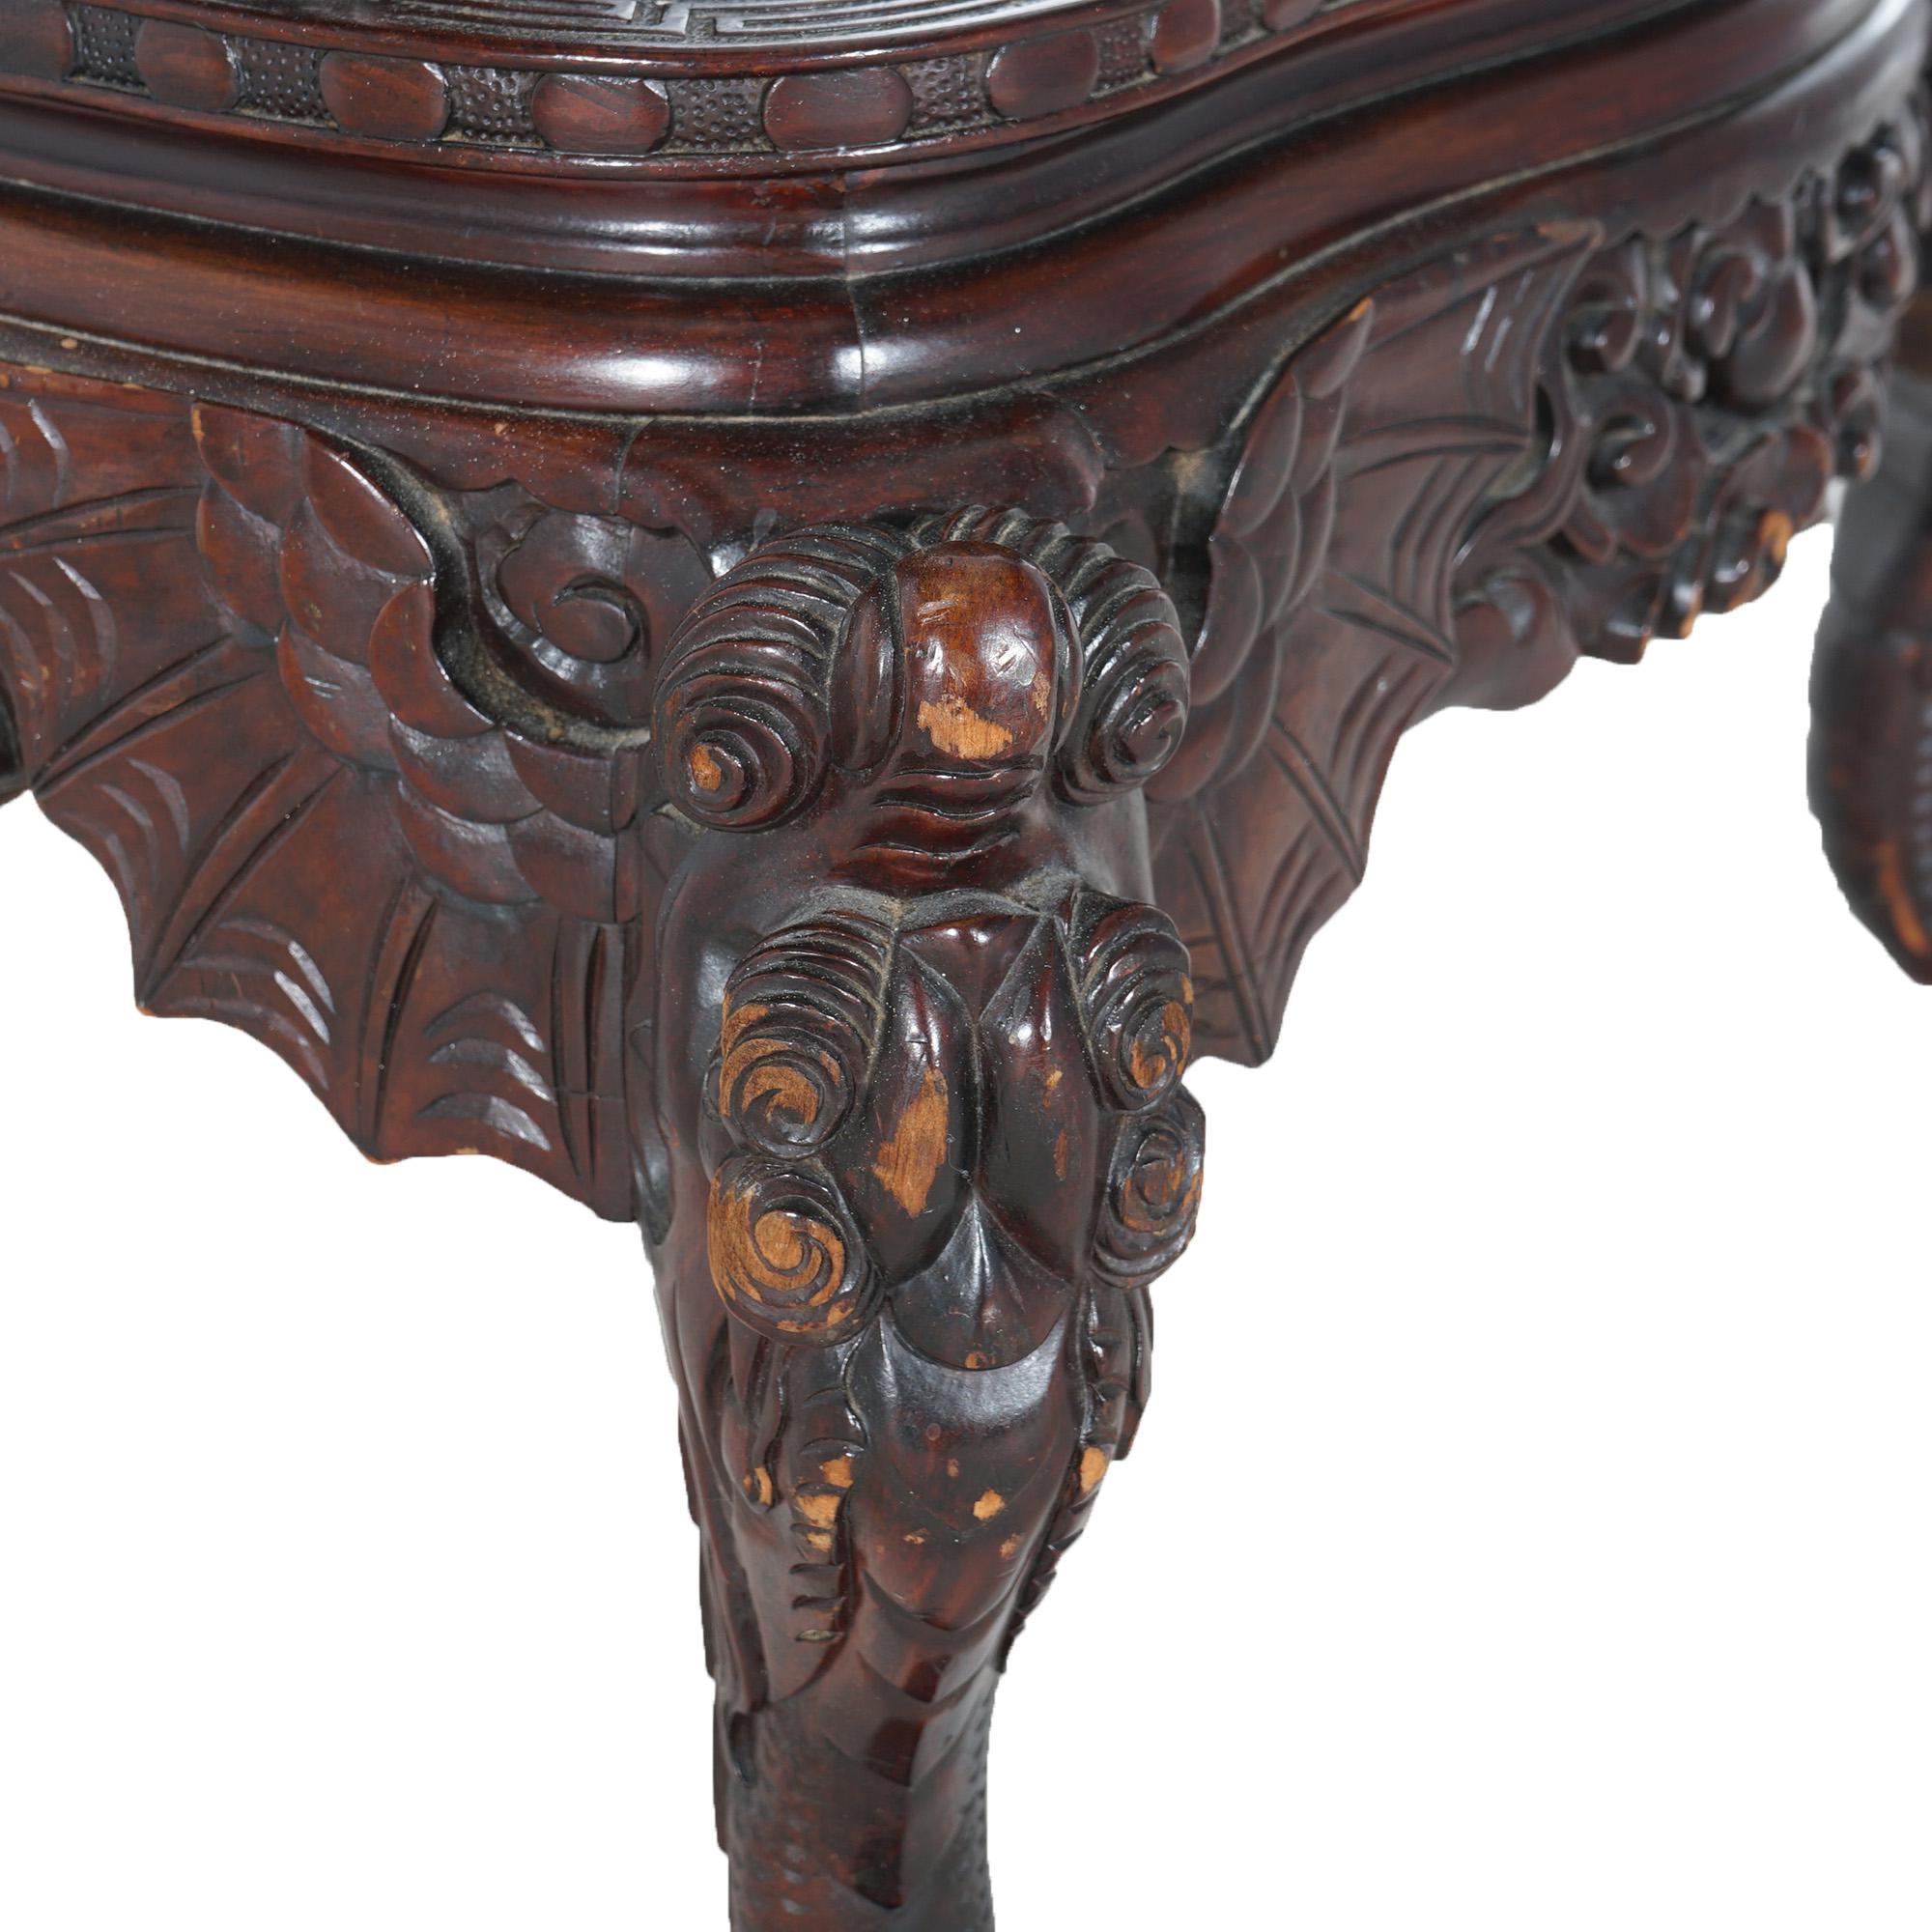 Antique Chinese Deep Carved Rosewood Figural King Throne Chair with Dragons 1920 For Sale 8